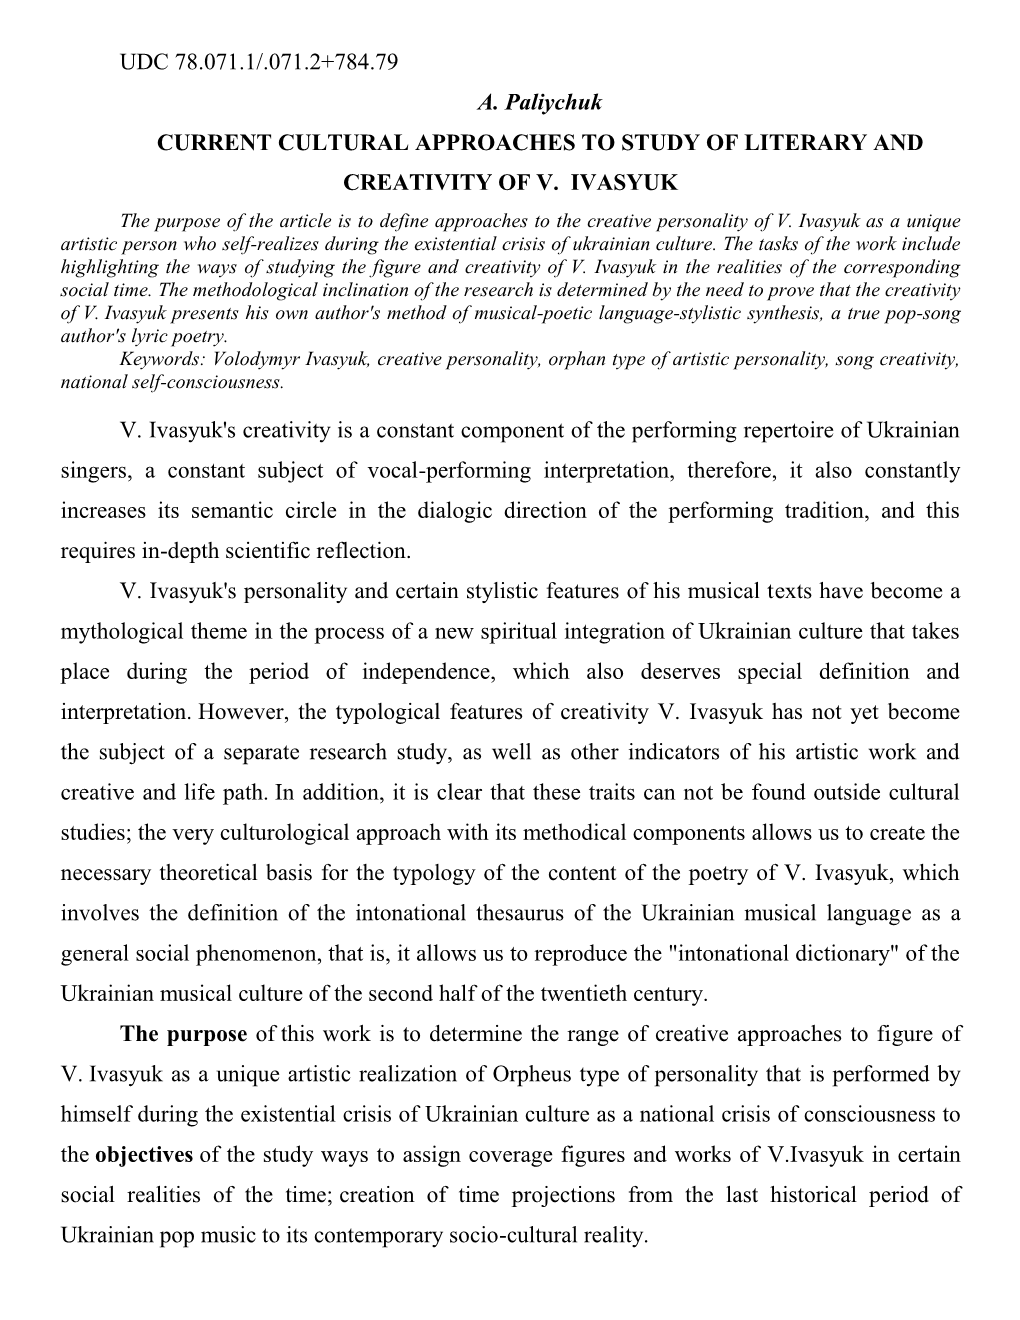 UDC 78.071.1/.071.2+784.79 A. Paliychuk CURRENT CULTURAL APPROACHES to STUDY of LITERARY and CREATIVITY of V